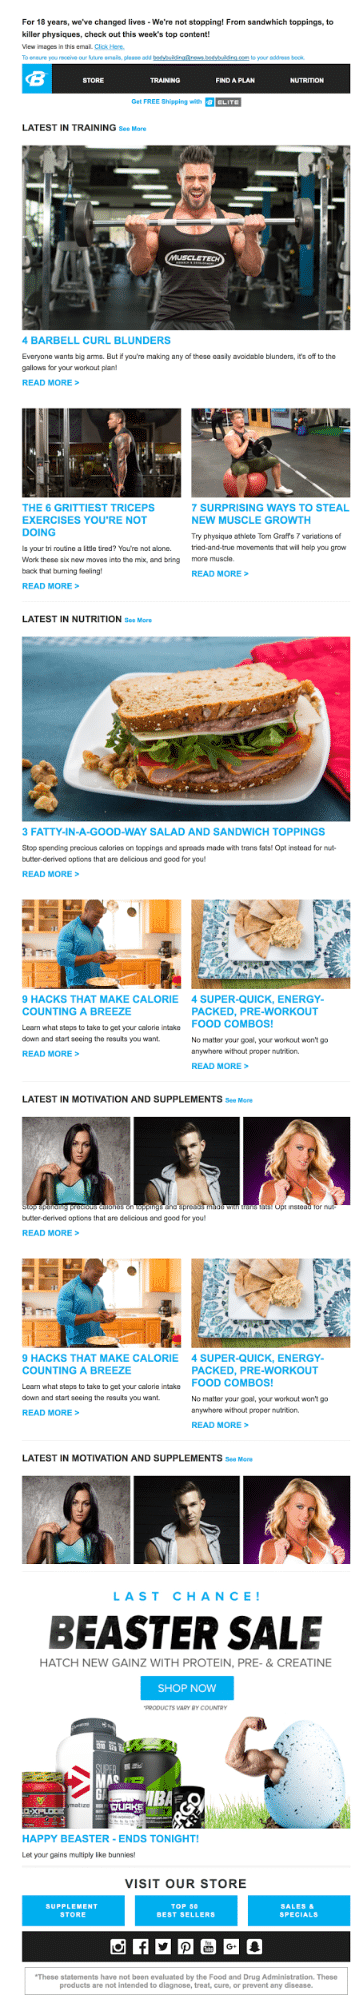 Bodybuilding.com – Lifecycle Marketing – Email Updates